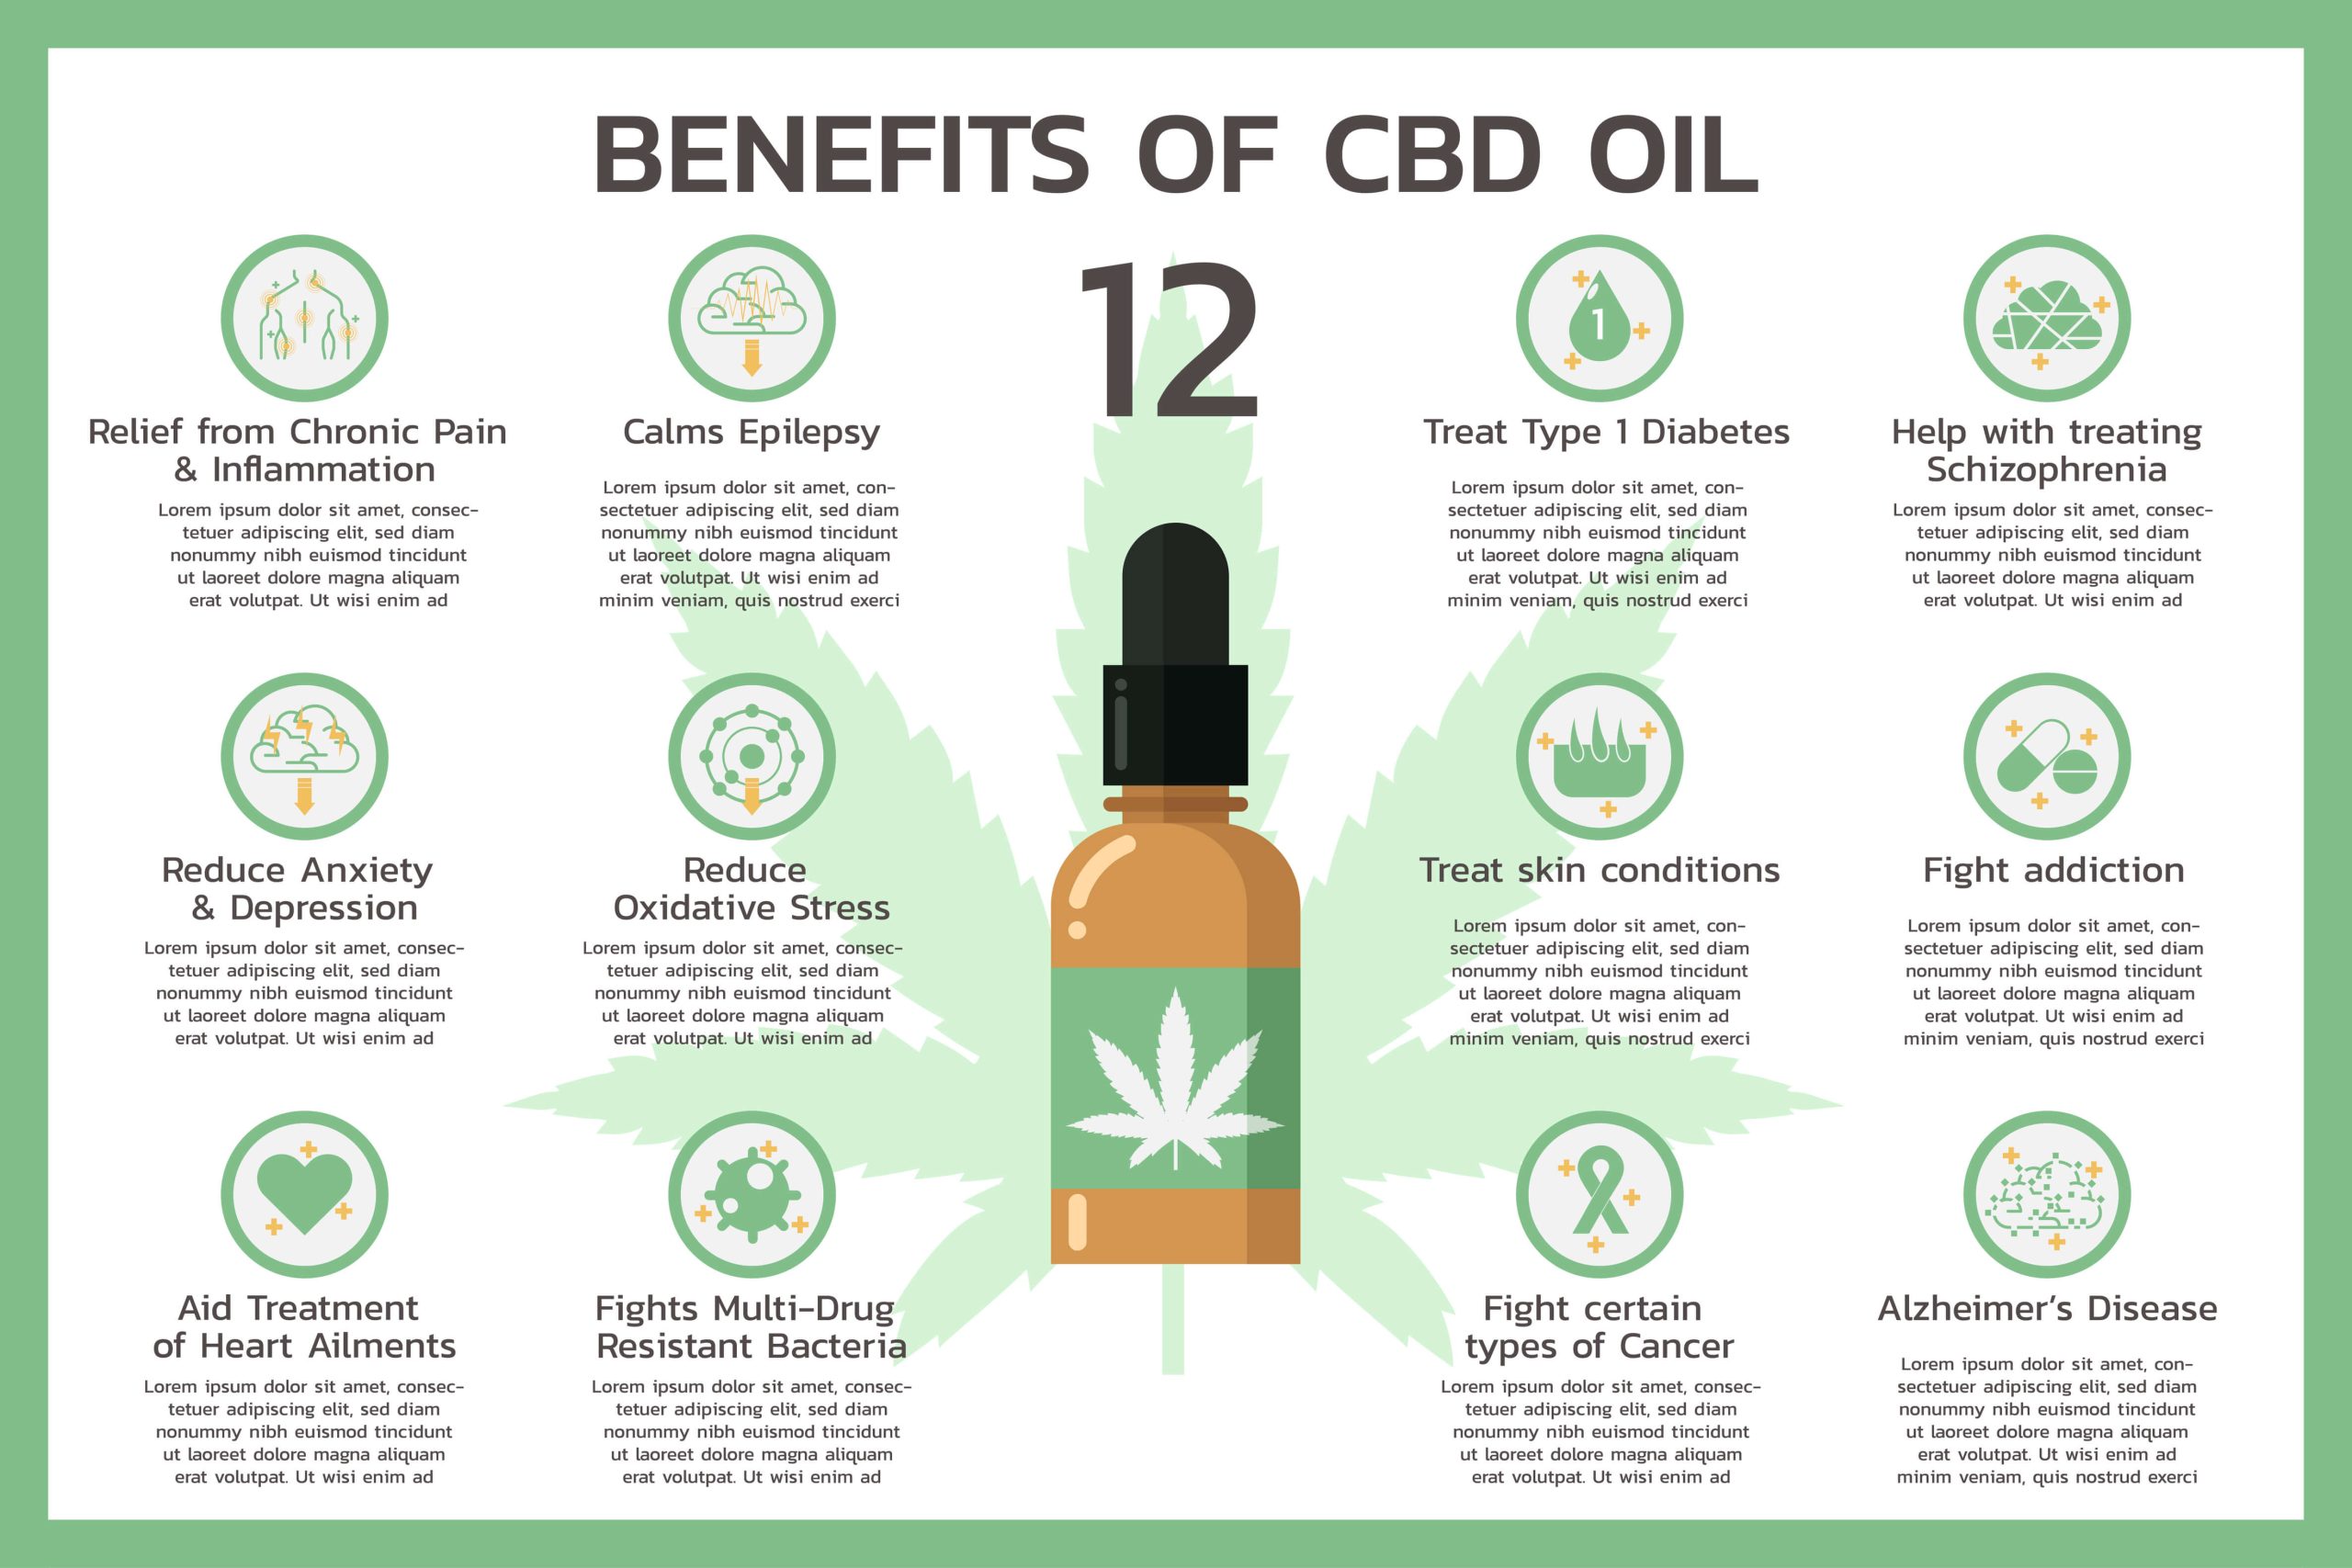 What are the best hemp oil benefits?